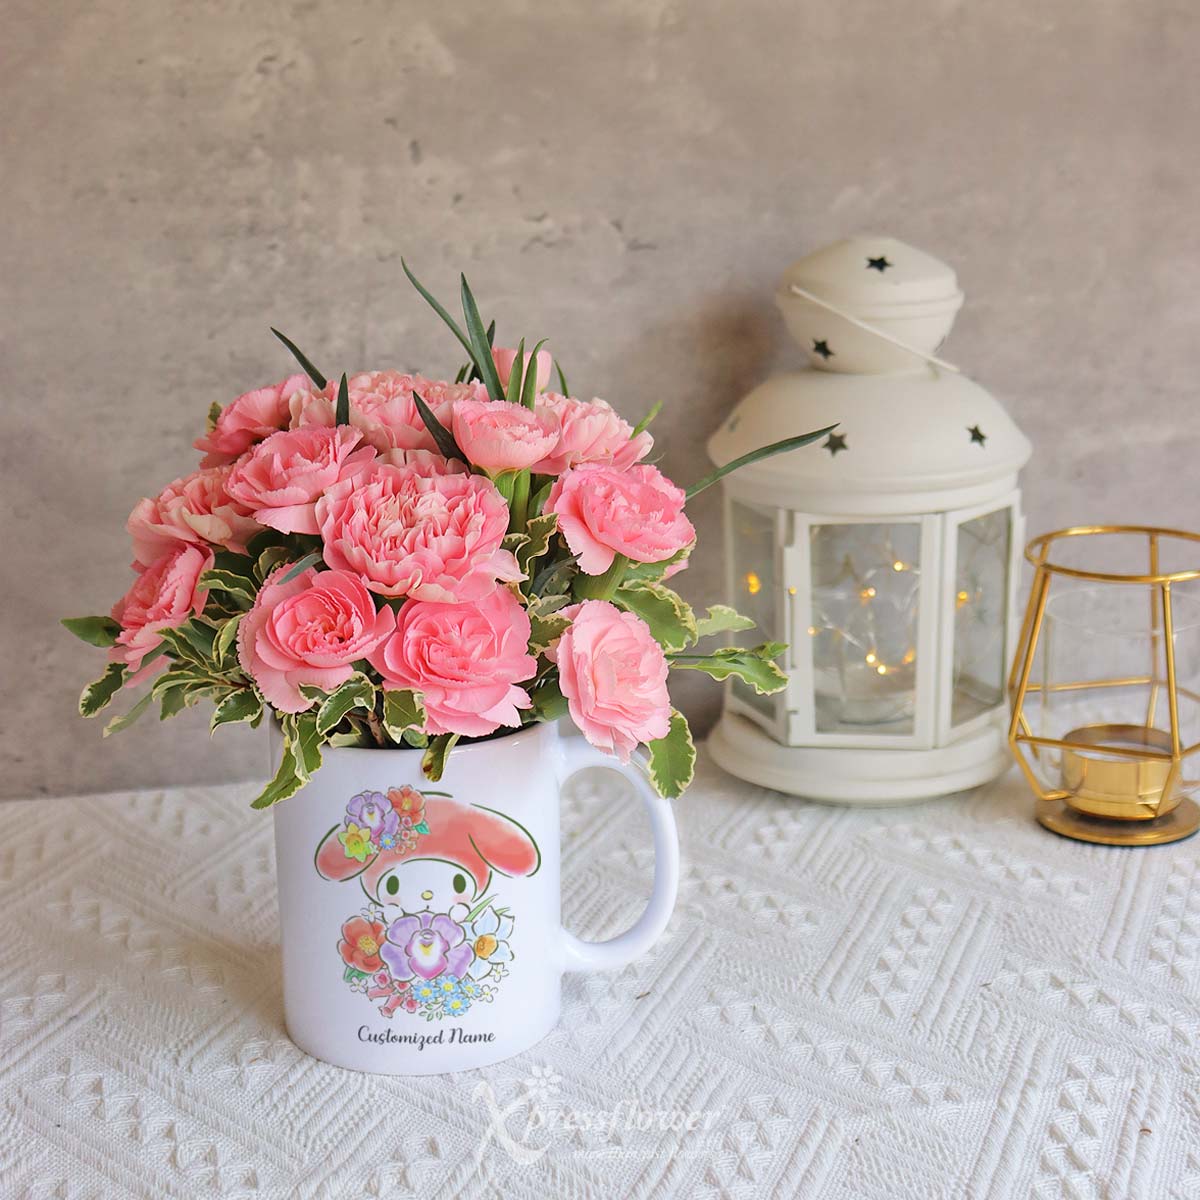 SNMG2309_Capricorn Creations 6 Pink Carnations with My Melody Personalised Mug Capricorn 3a